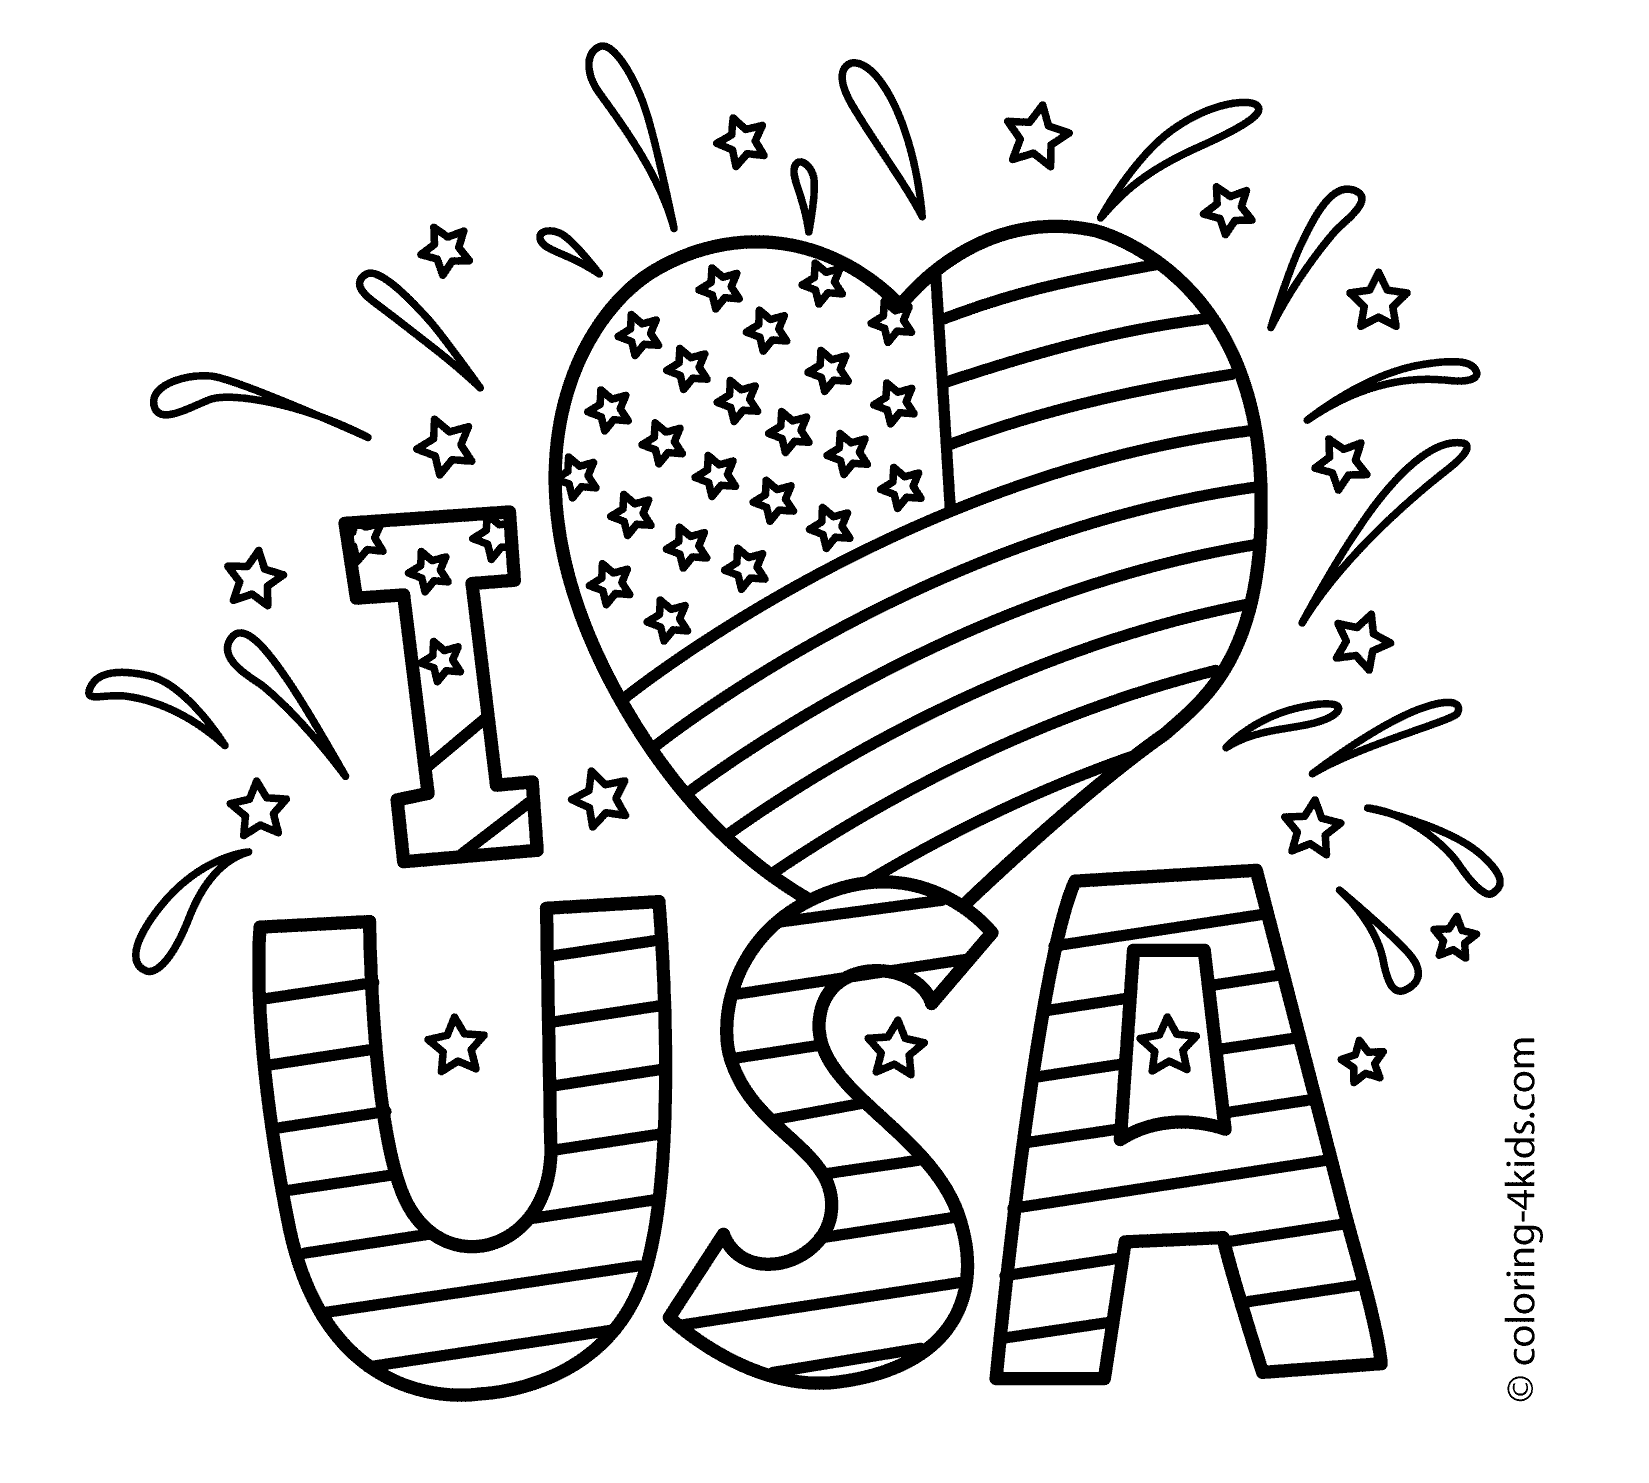 independence day coloring independence day coloring pages to download and print for free day independence coloring 